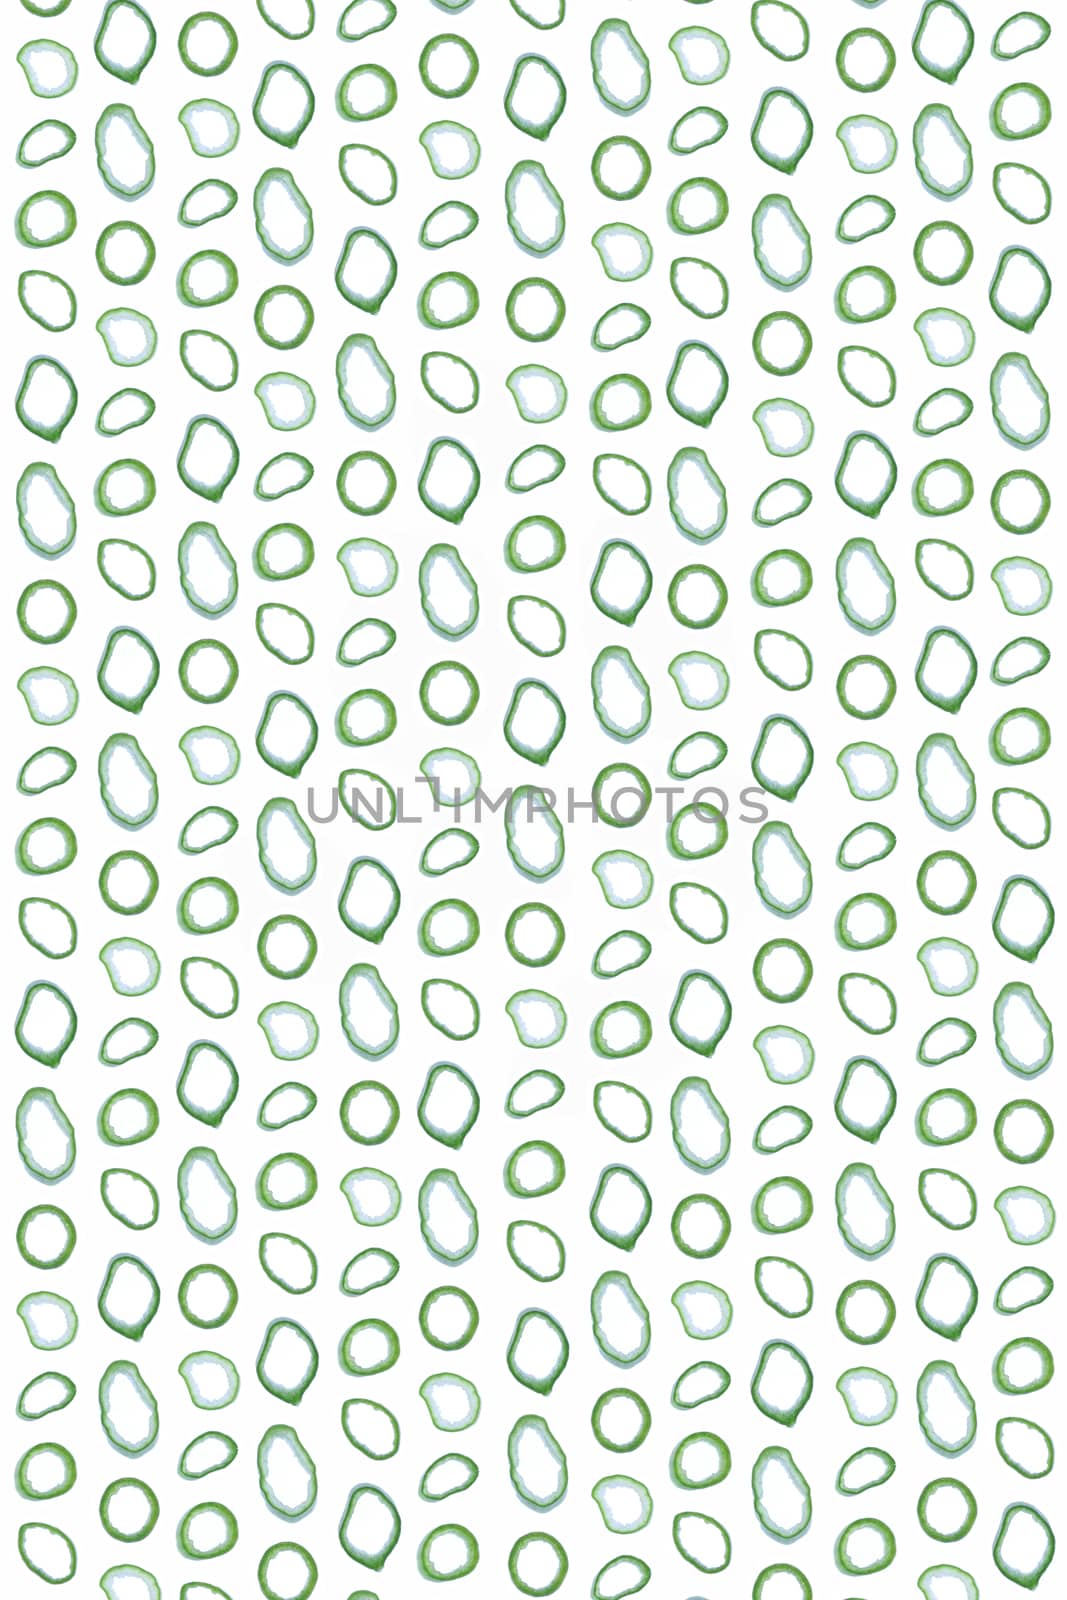 Onion rings pattern. Fresh healthy vegetable texture. Vegetarian product background. Portrait orientation. Vertical direction.